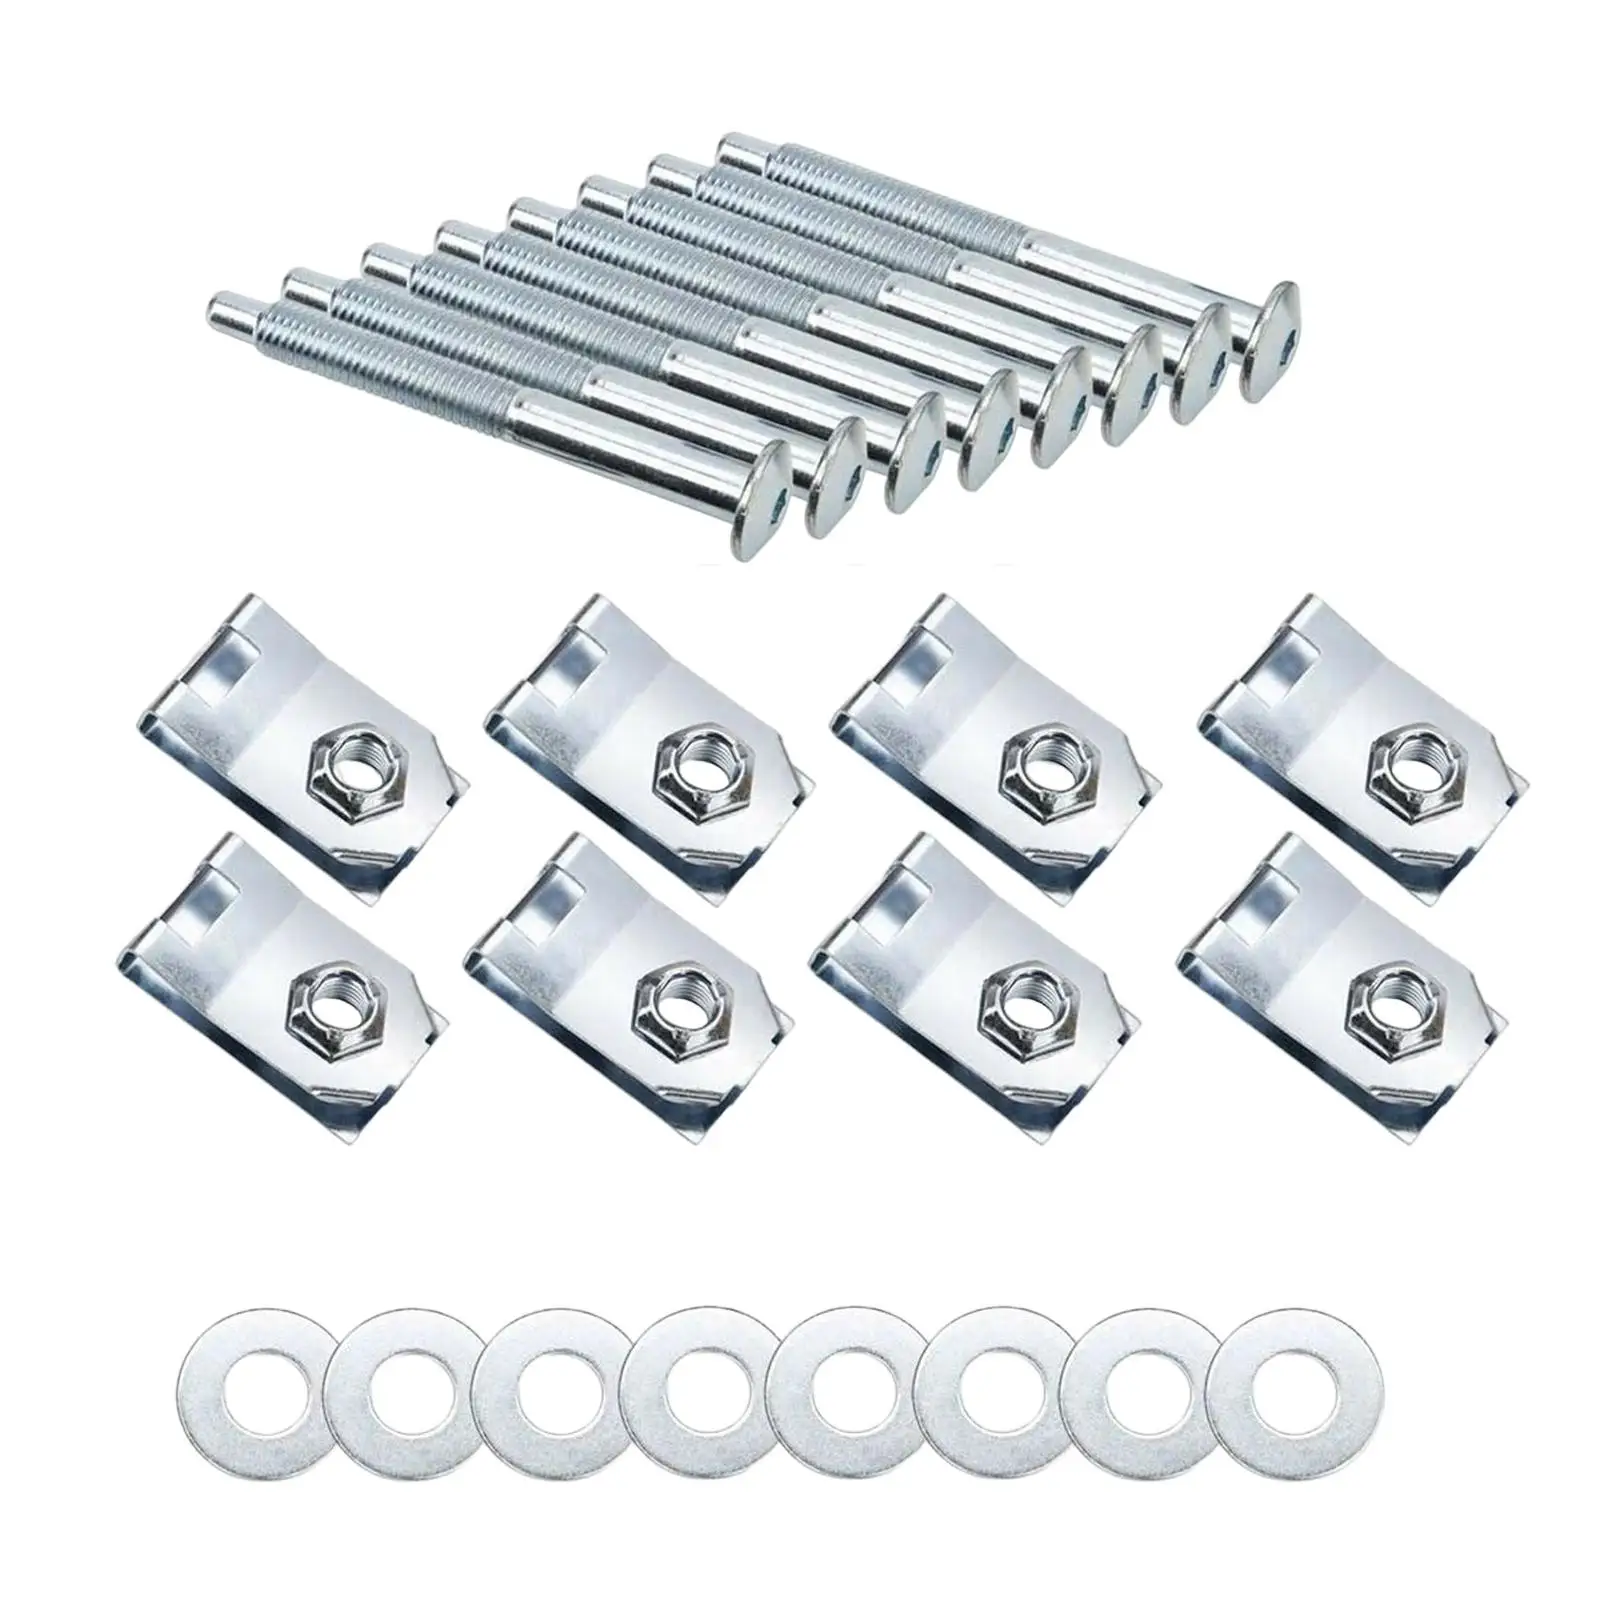 Truck Bed Mounting Bolt Kit Replace Parts for Ford Super Duty F250 F550 Accessories